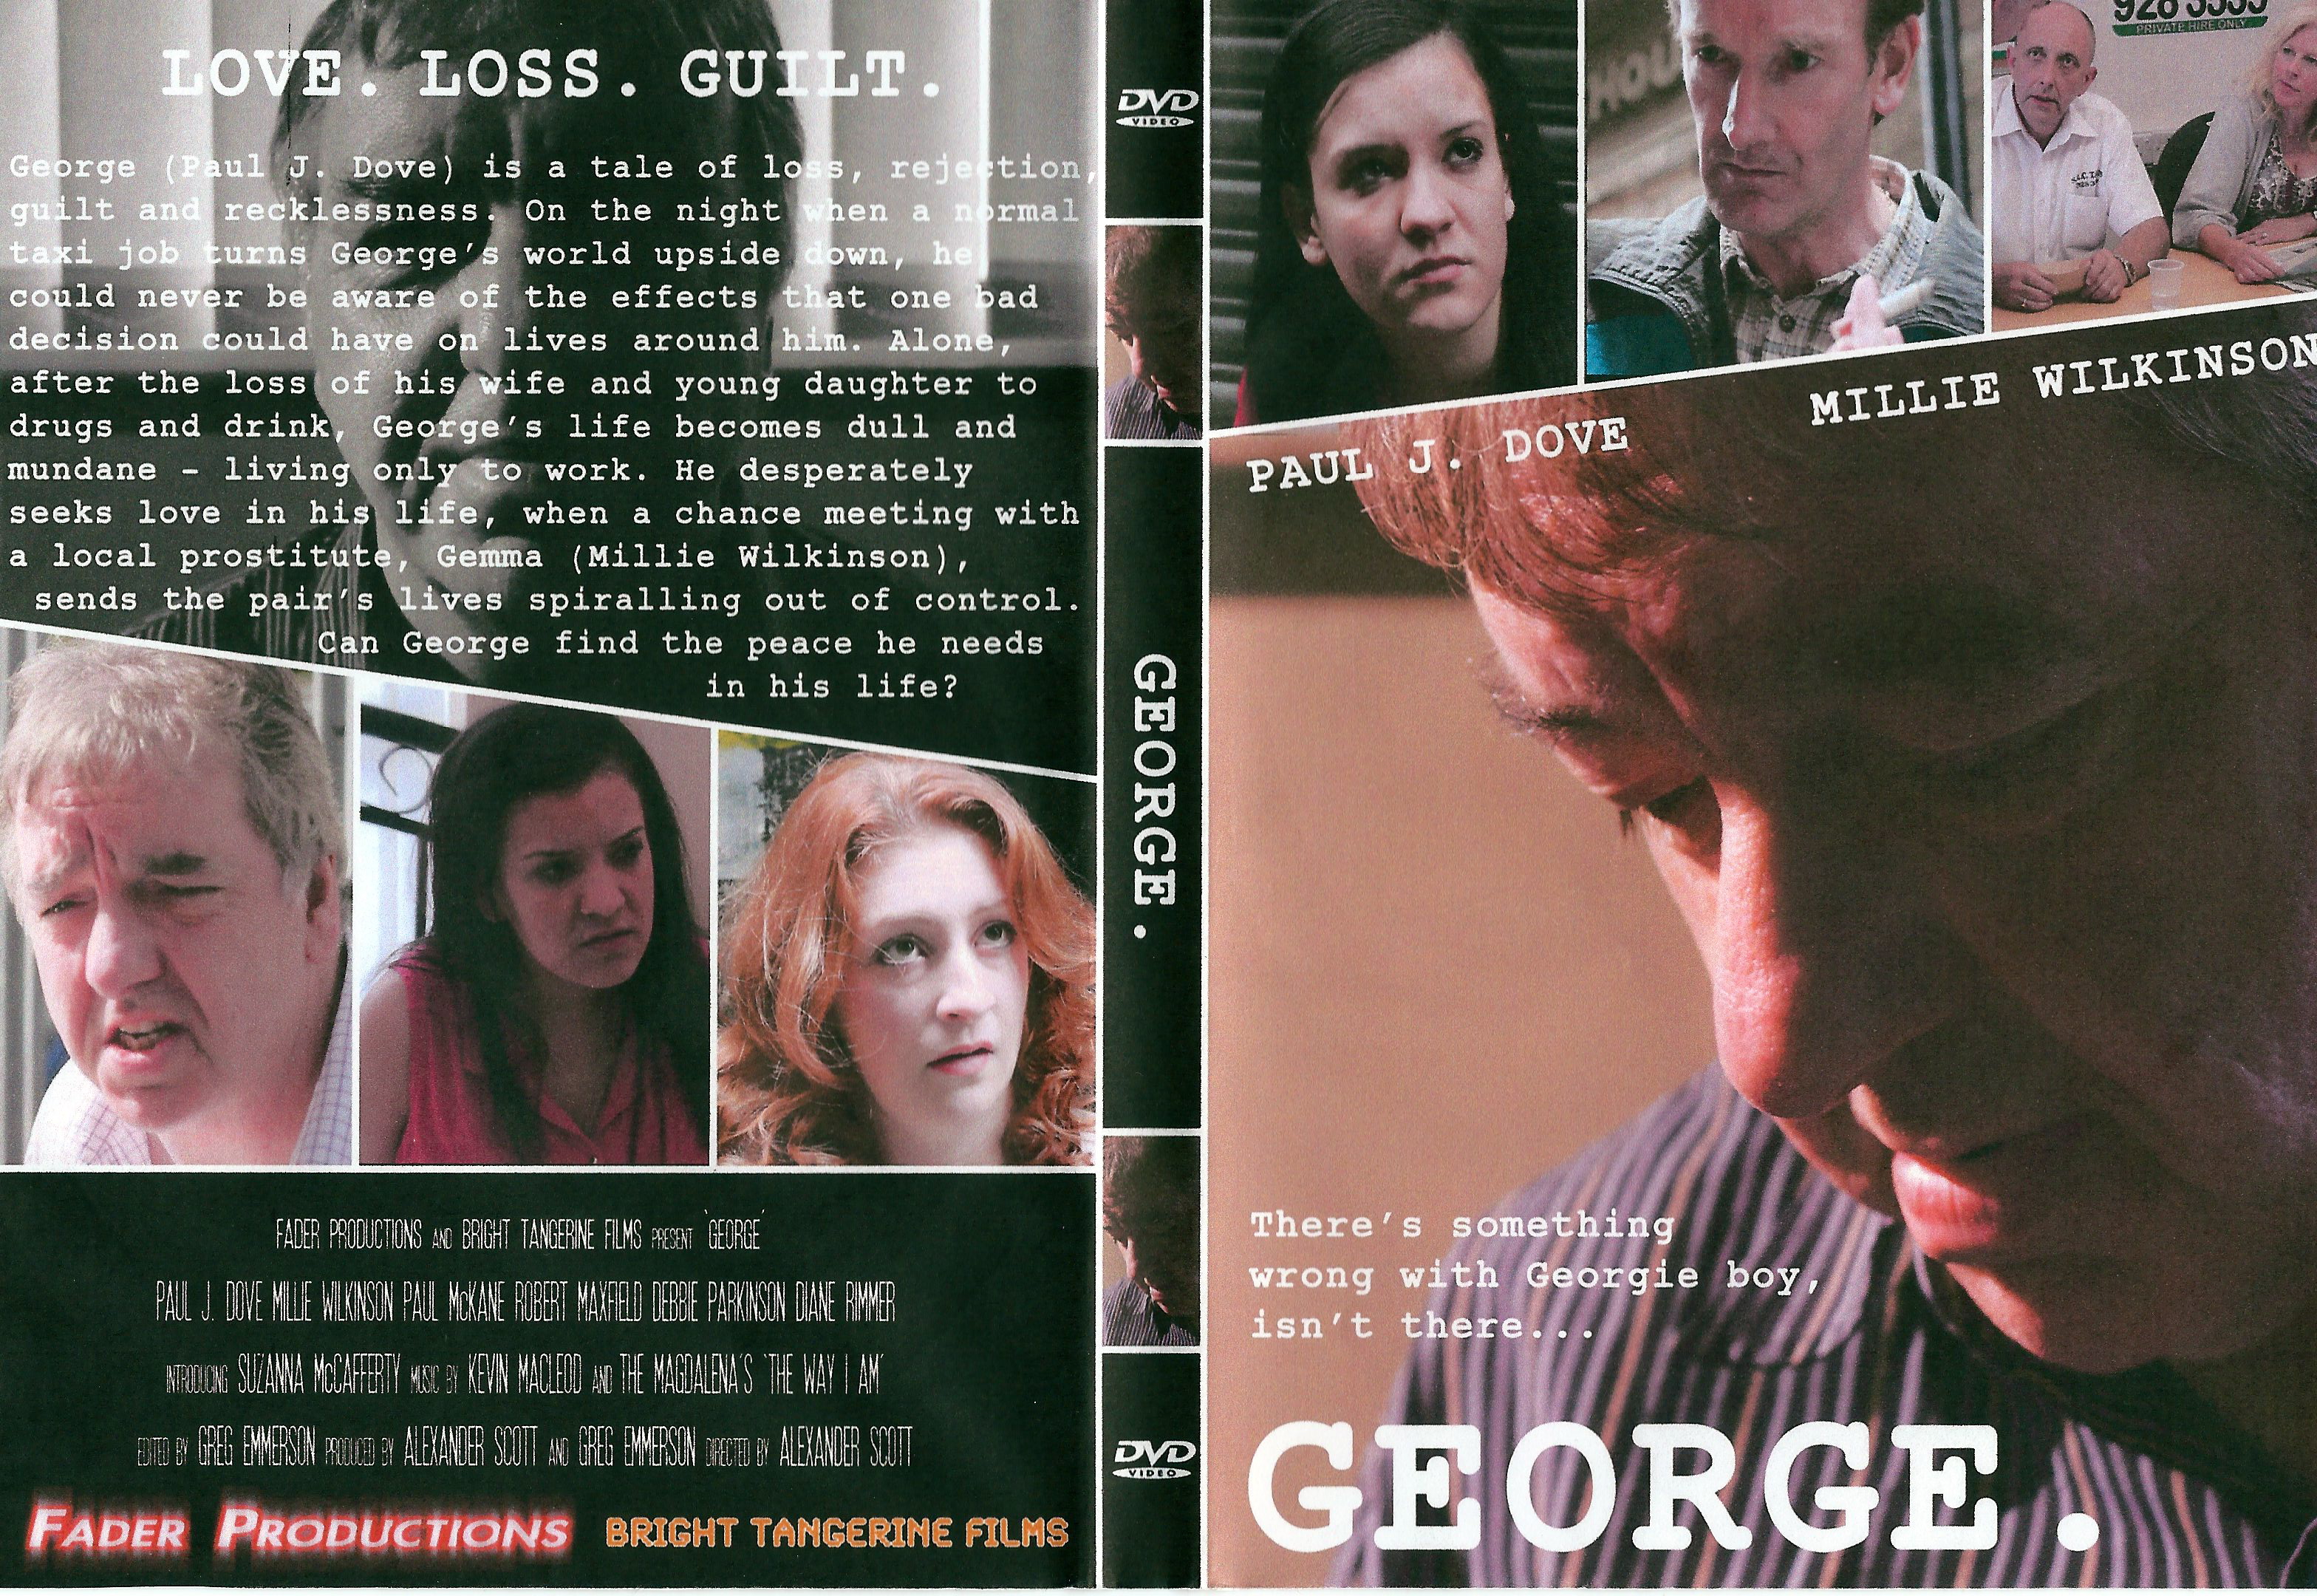 The DVD Cover for the TV Drama George Paul J. Dove plays George.